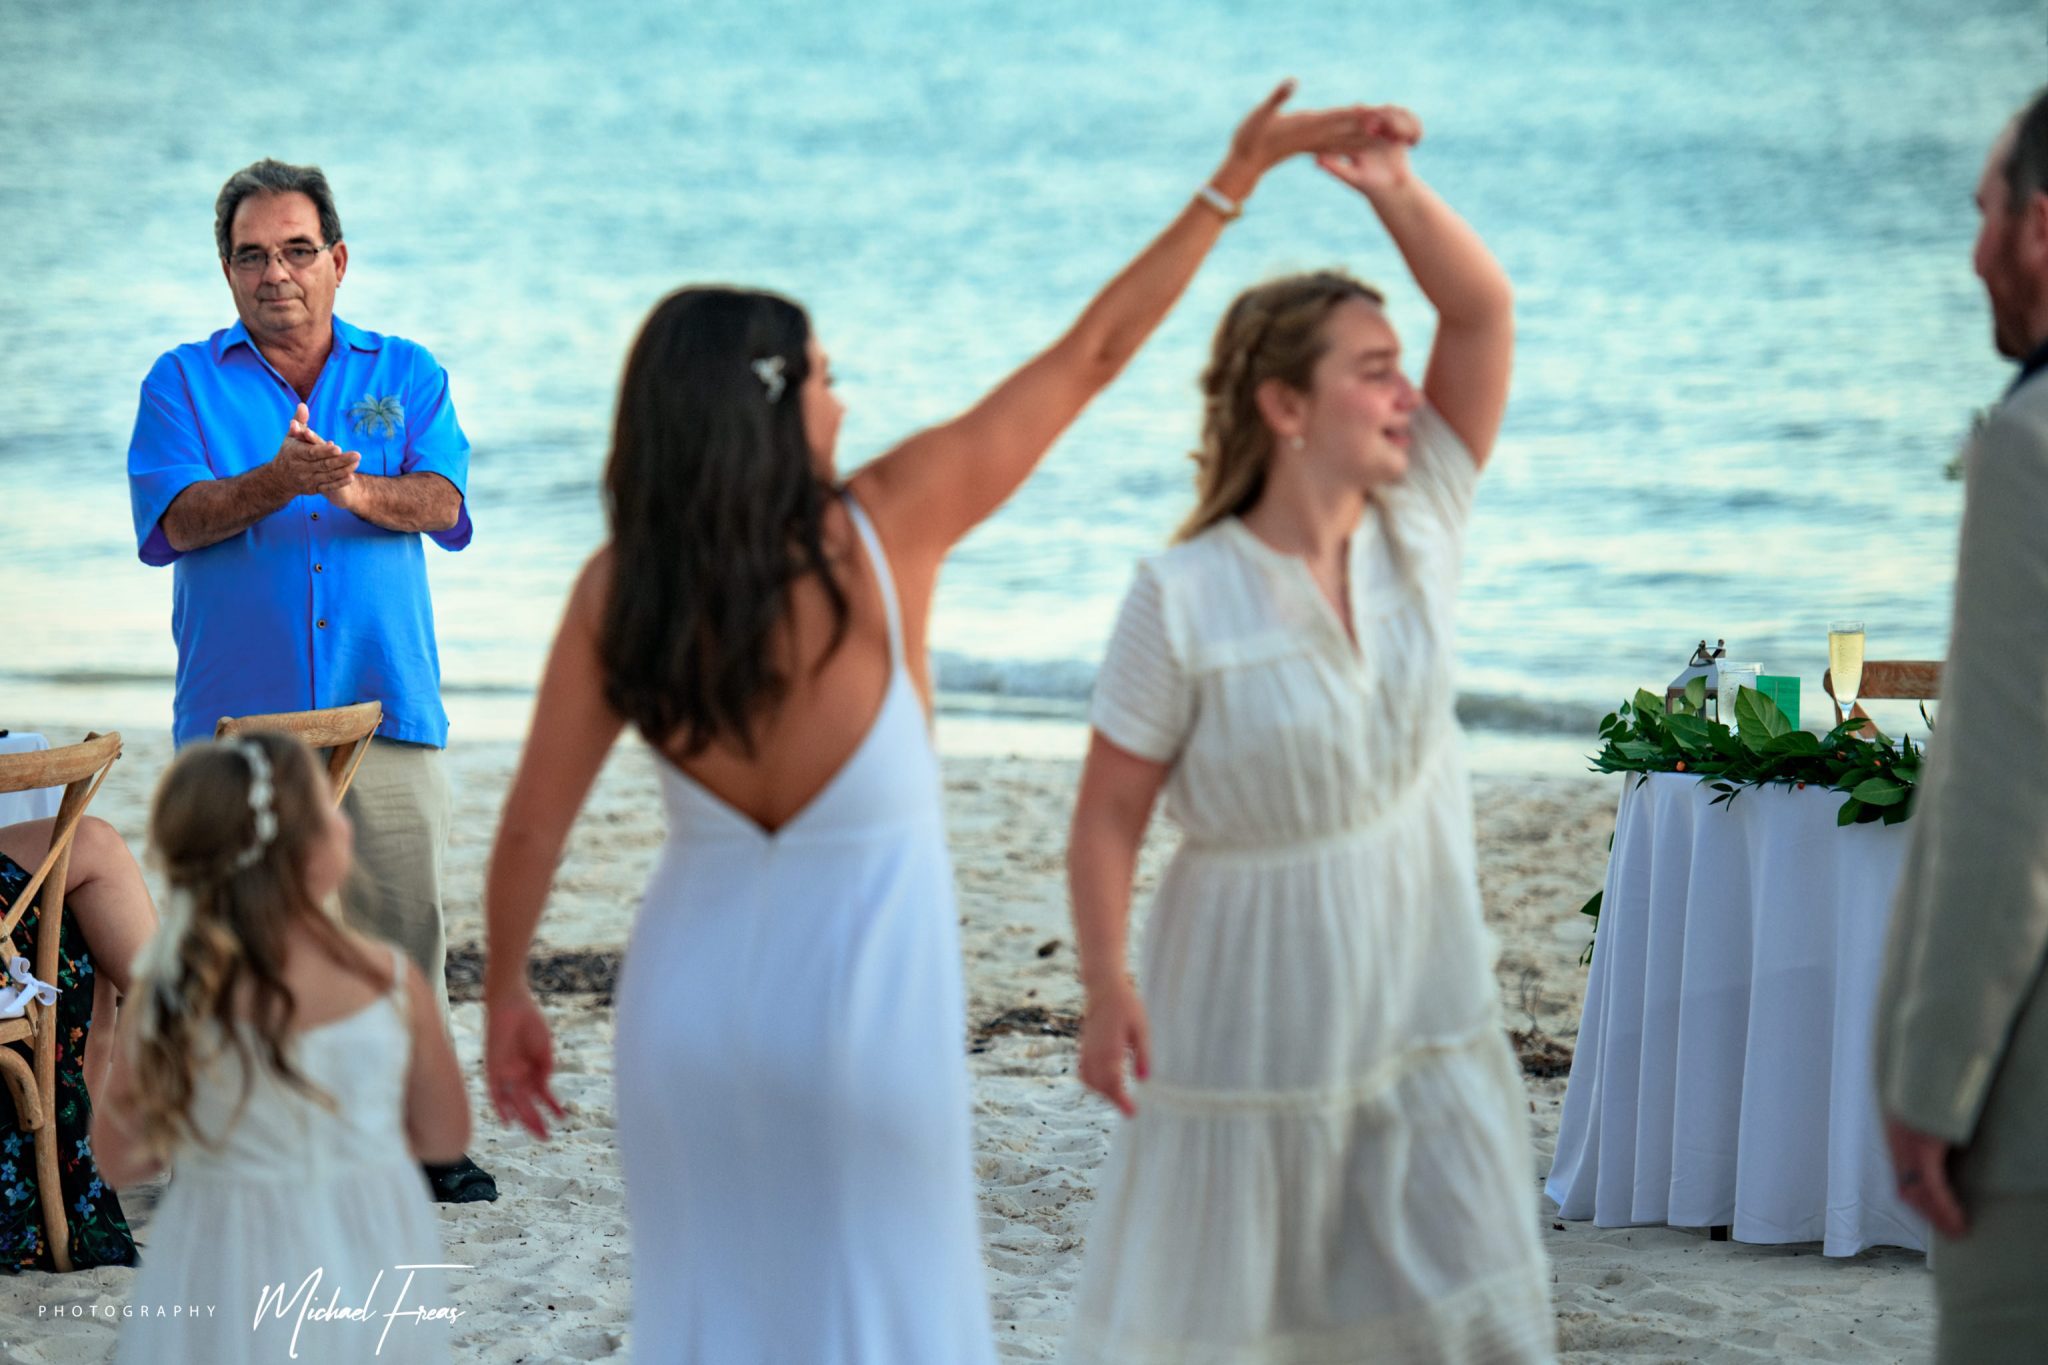 wedding guests dancing on beach at the reach resort in key west florida